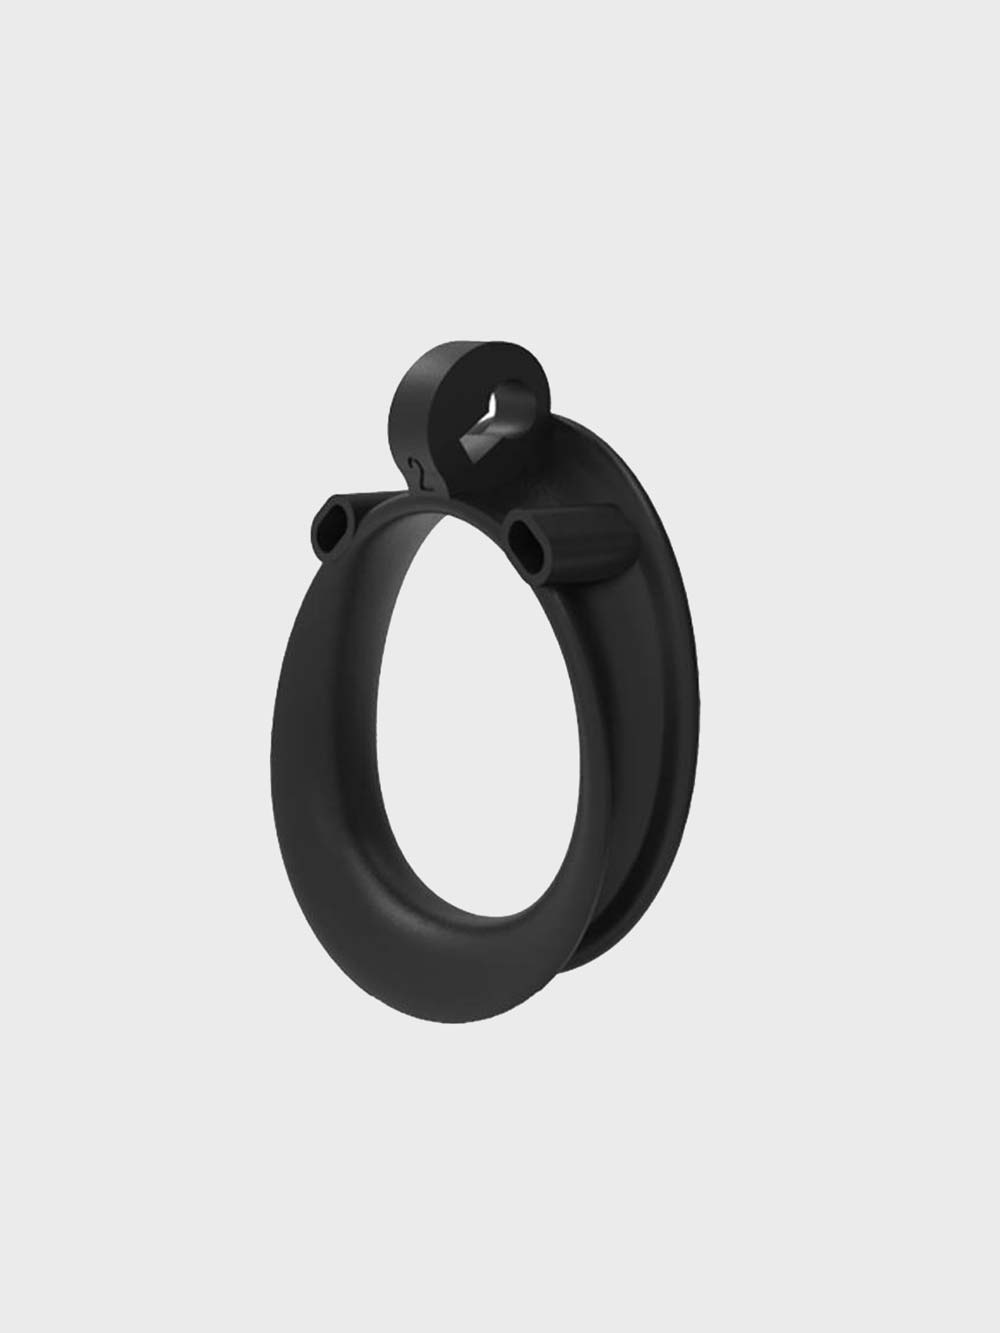 45mm ring for a chastity cage